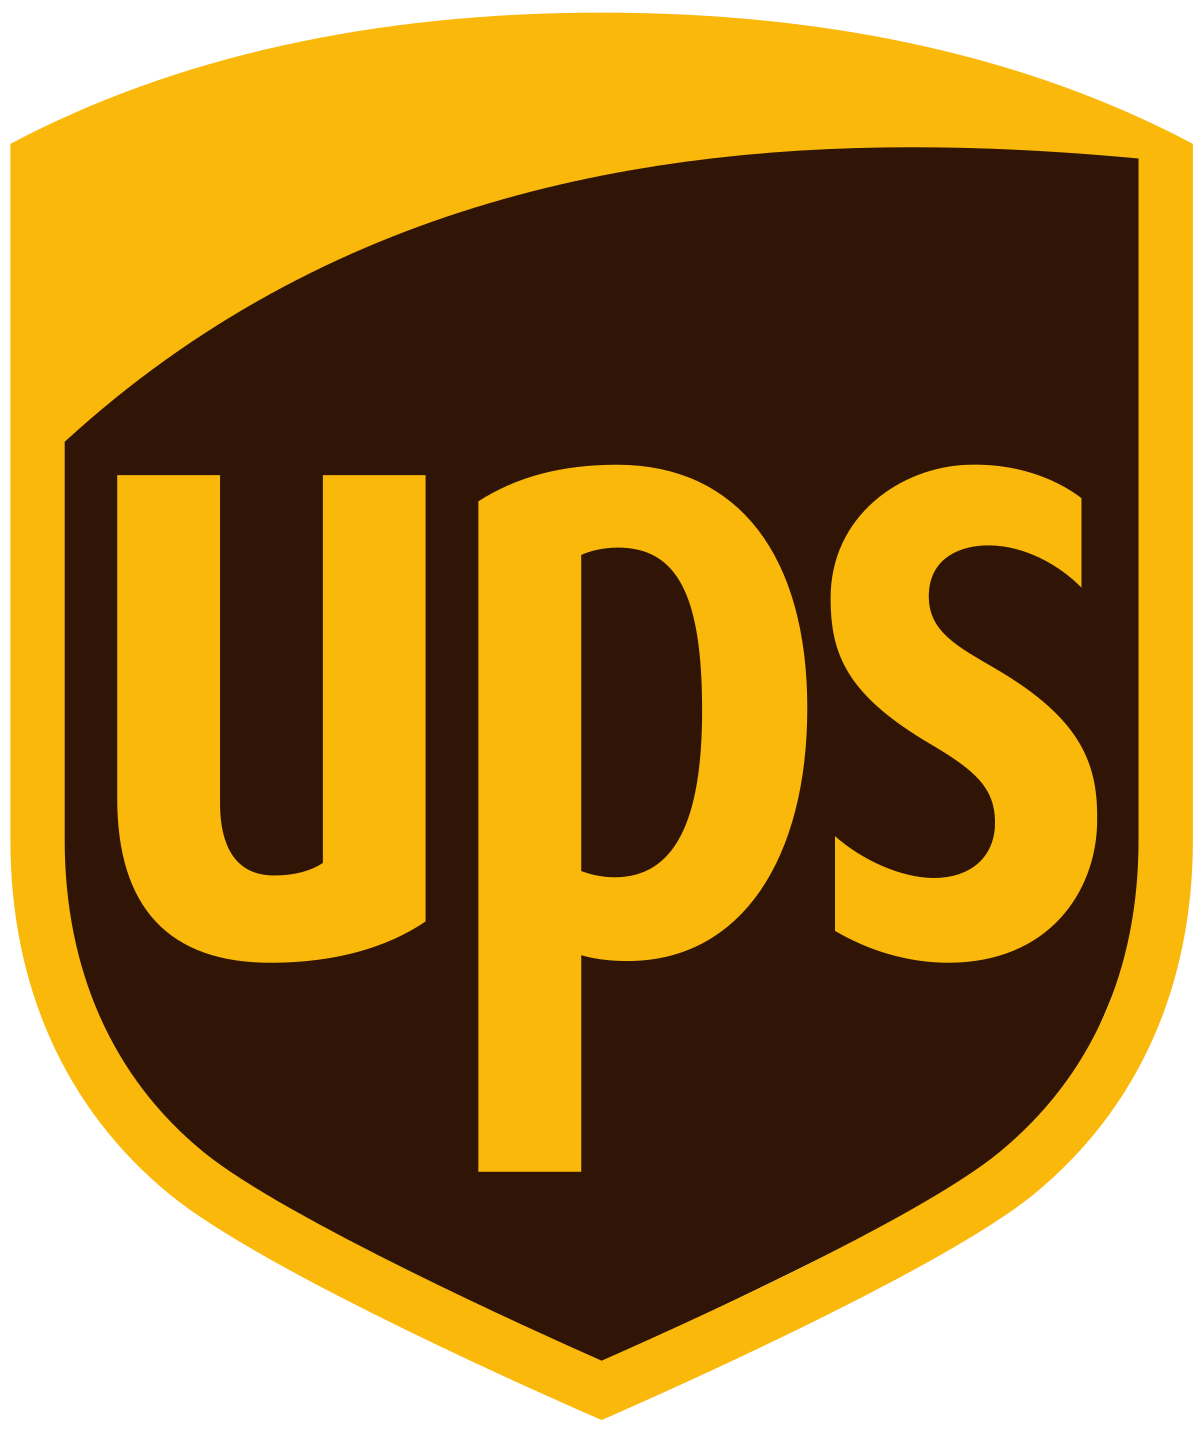 UPS Standard Shipping deliver to all EU countries